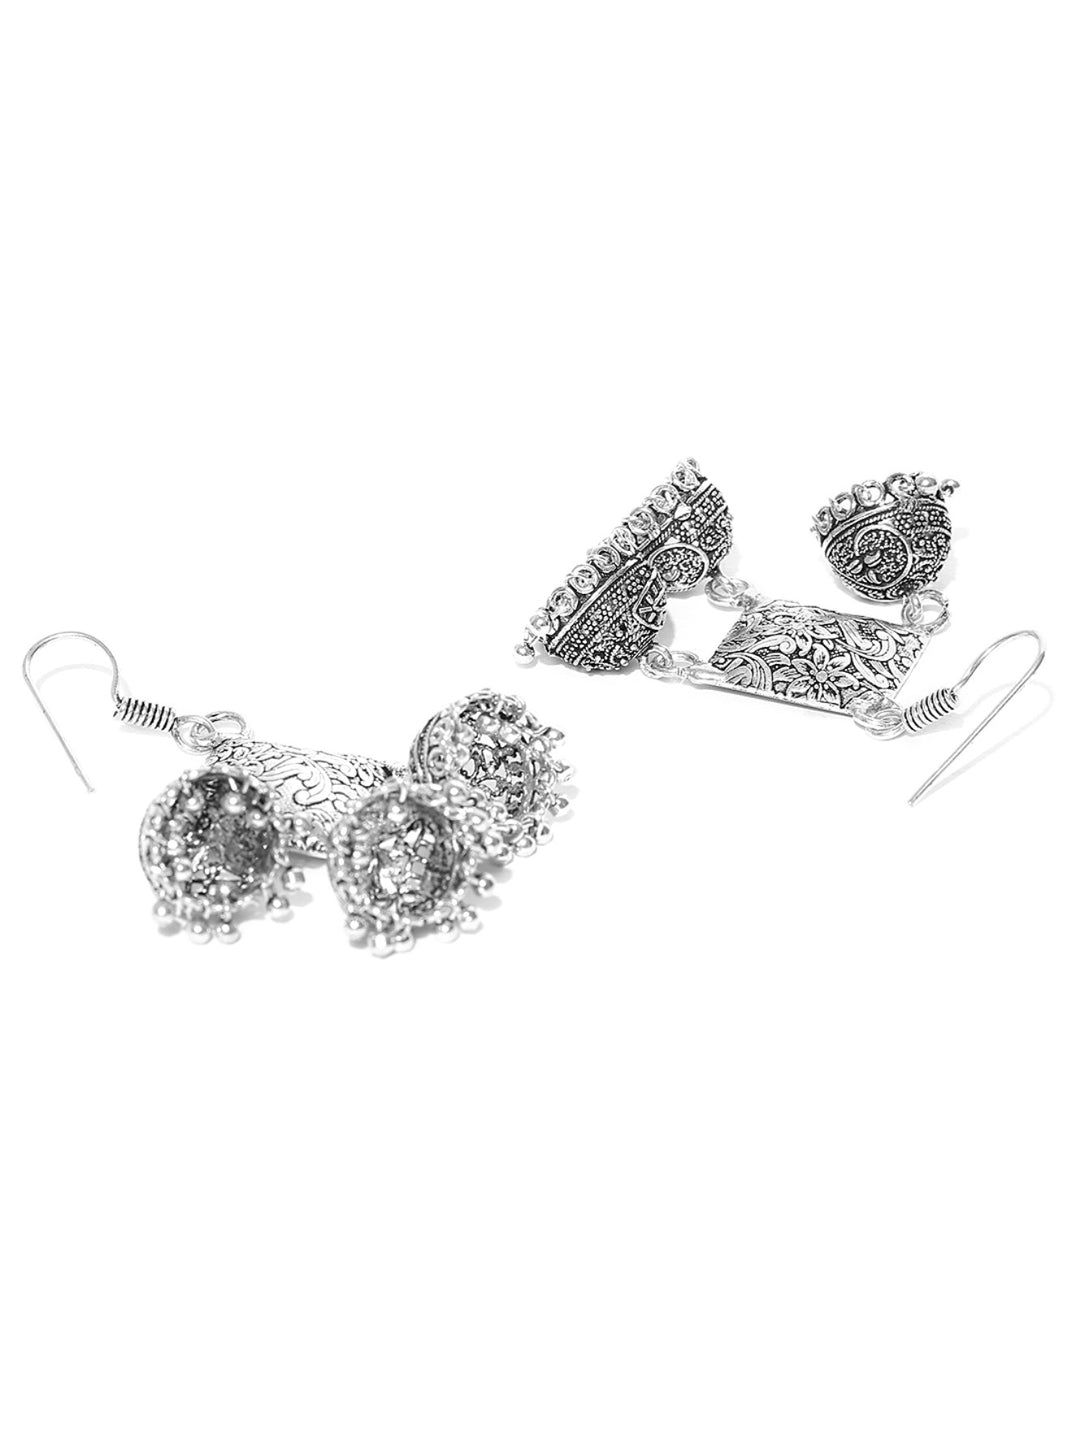 German Silver Square Shape With Triple Jhumki Drop Earrings For Women And Girls